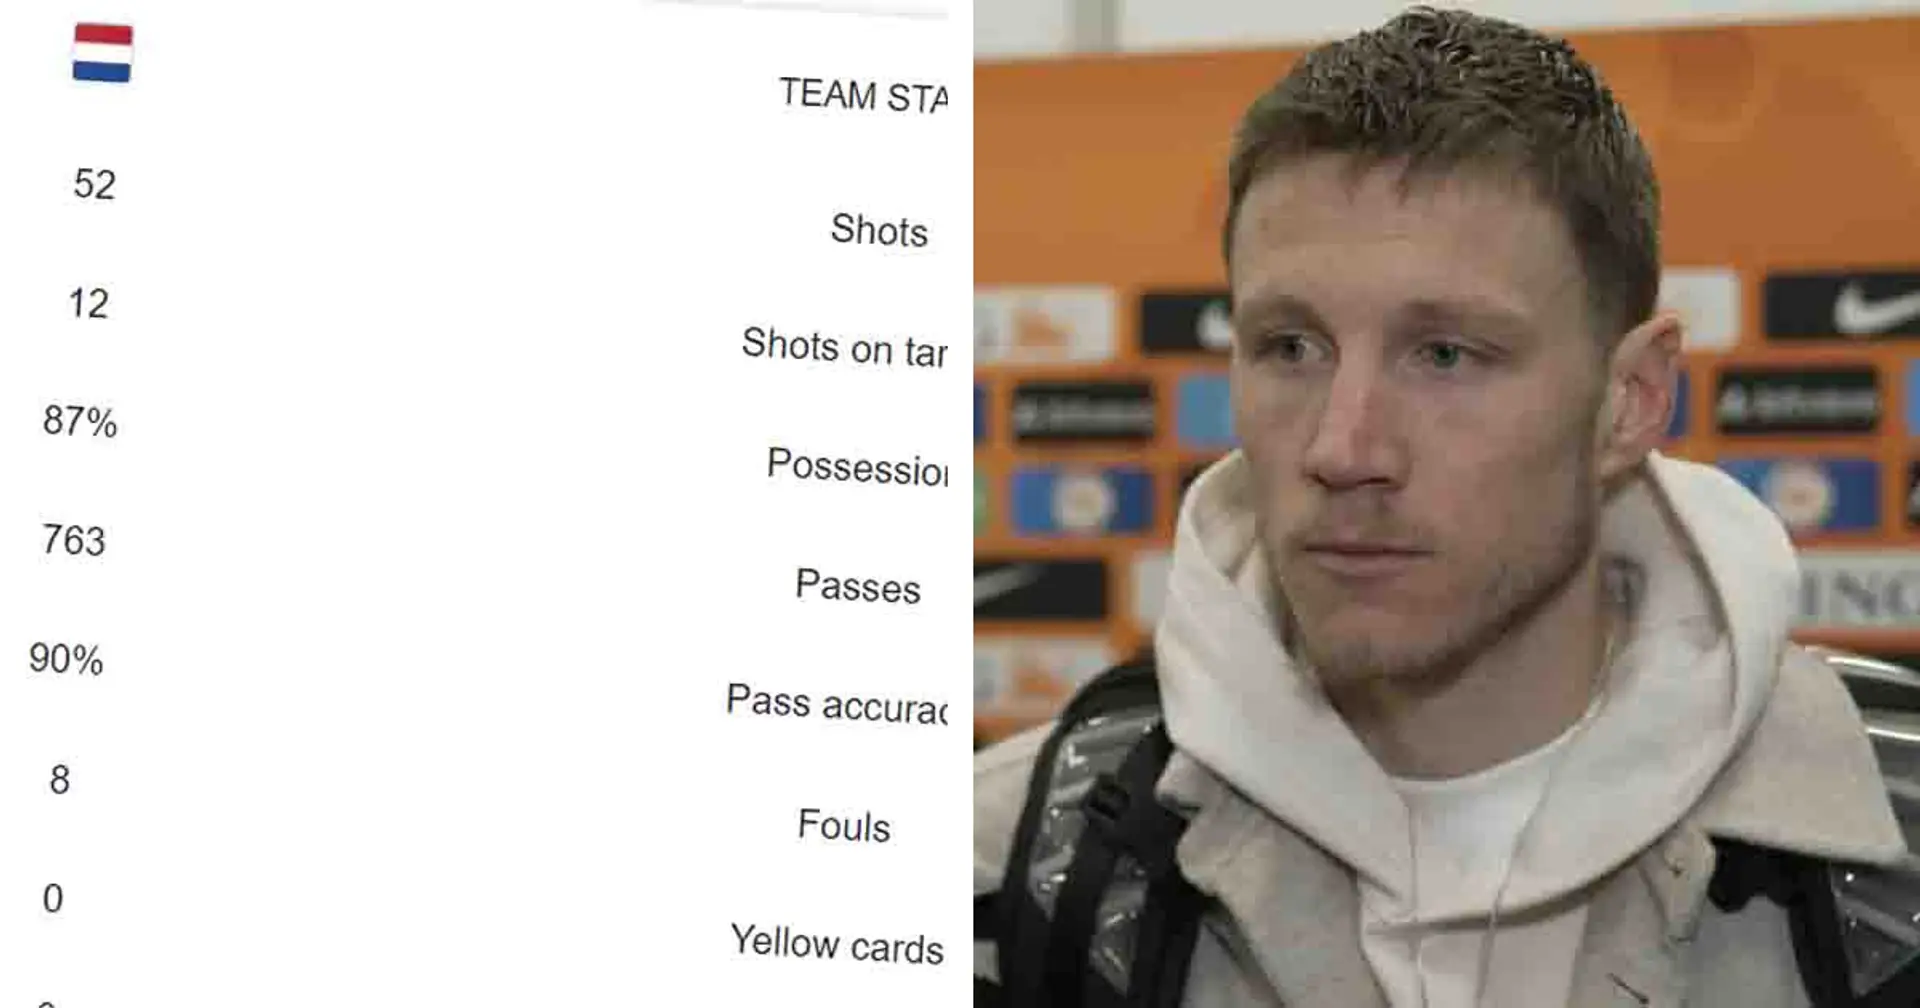 Weghorst asked about another blank as Netherlands have 52 shots in 3-0 win — he responds